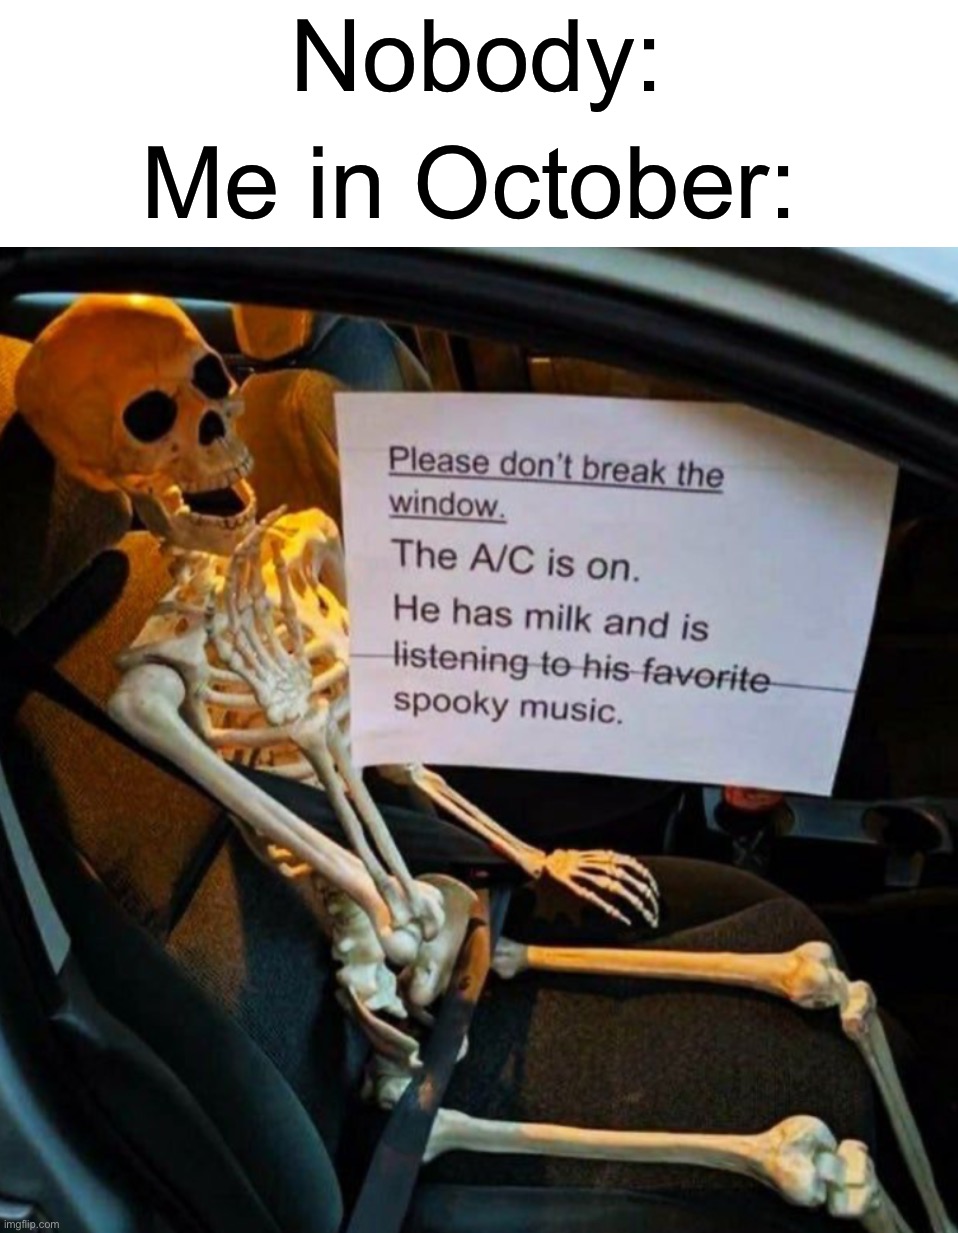 I have milk and I am listening to spooky scary skeletons | Nobody:; Me in October: | image tagged in memes,funny,halloween,skeleton,spooky month,spooky scary skeletons | made w/ Imgflip meme maker